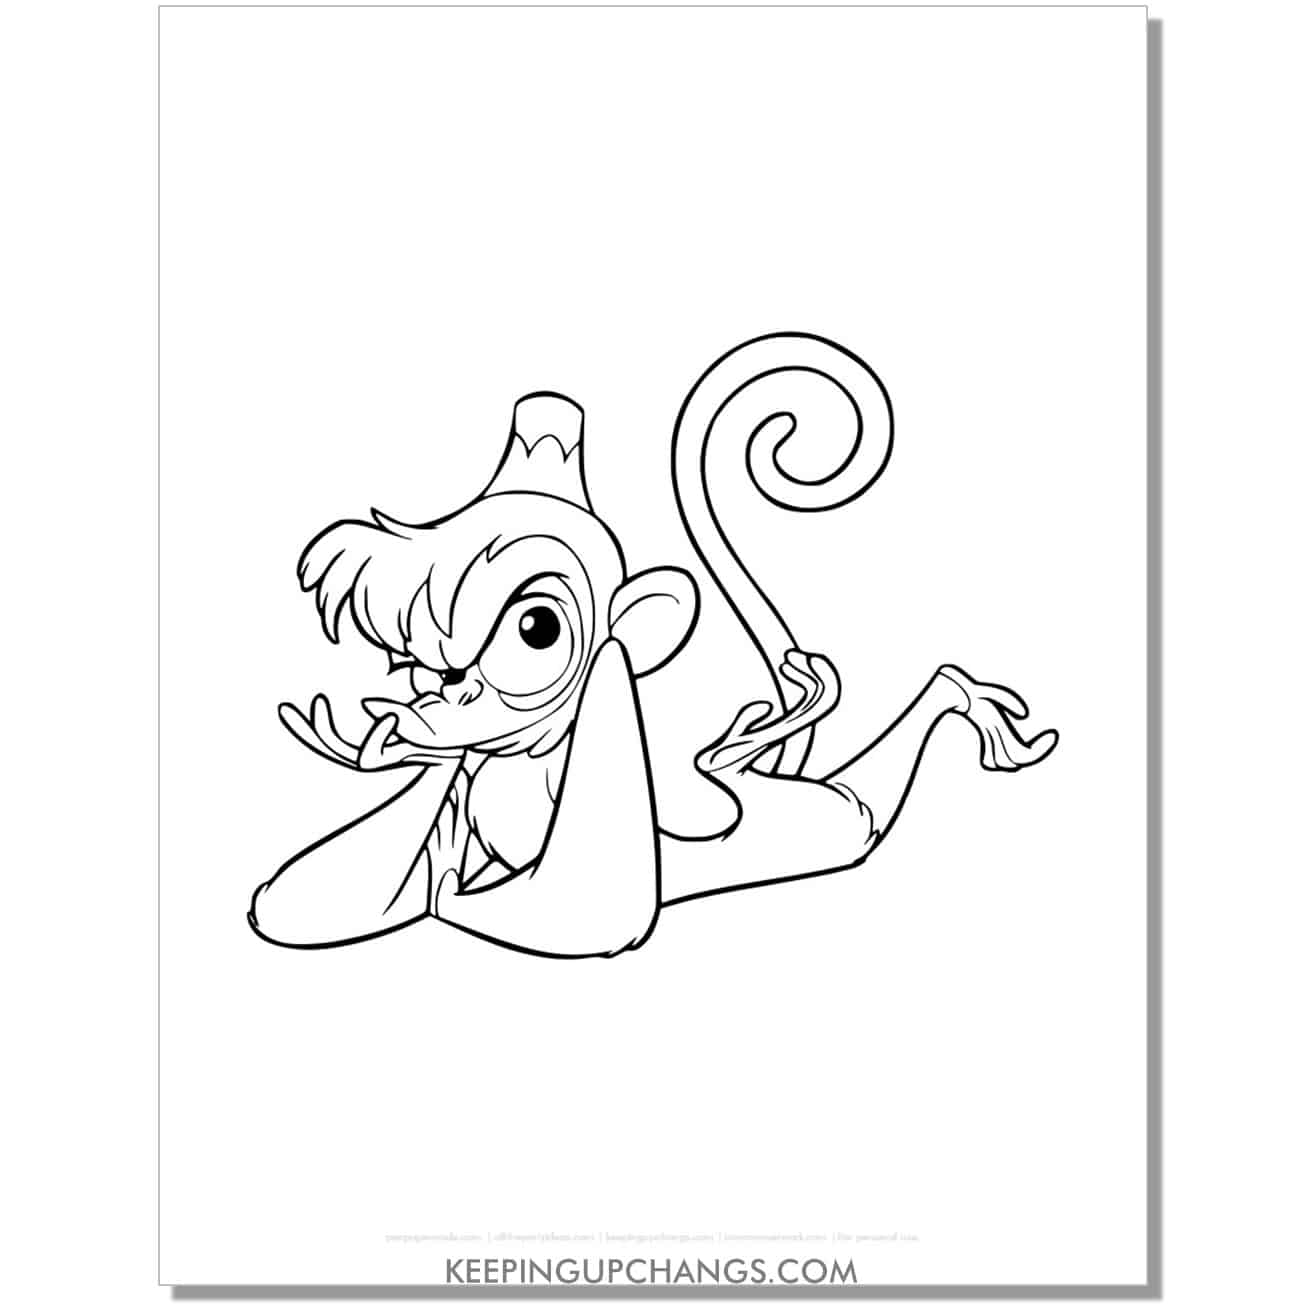 aladdin abu with upset look coloring page, sheet.